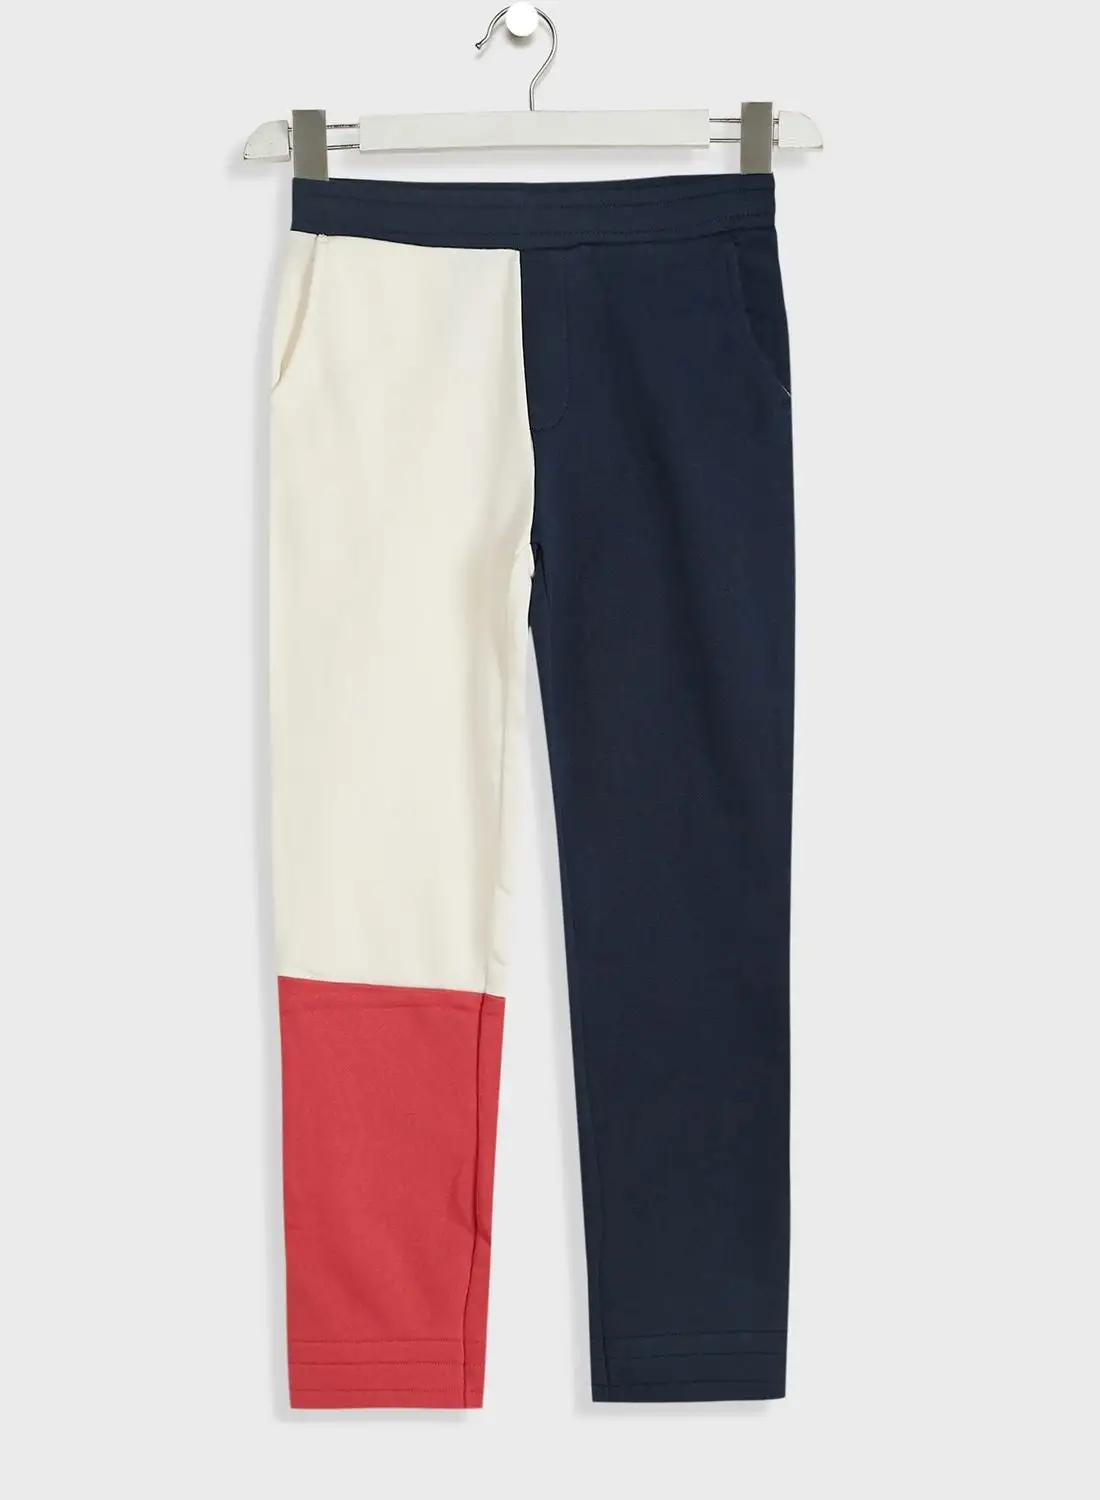 TOMMY HILFIGER Youth Color Block Sweatpants